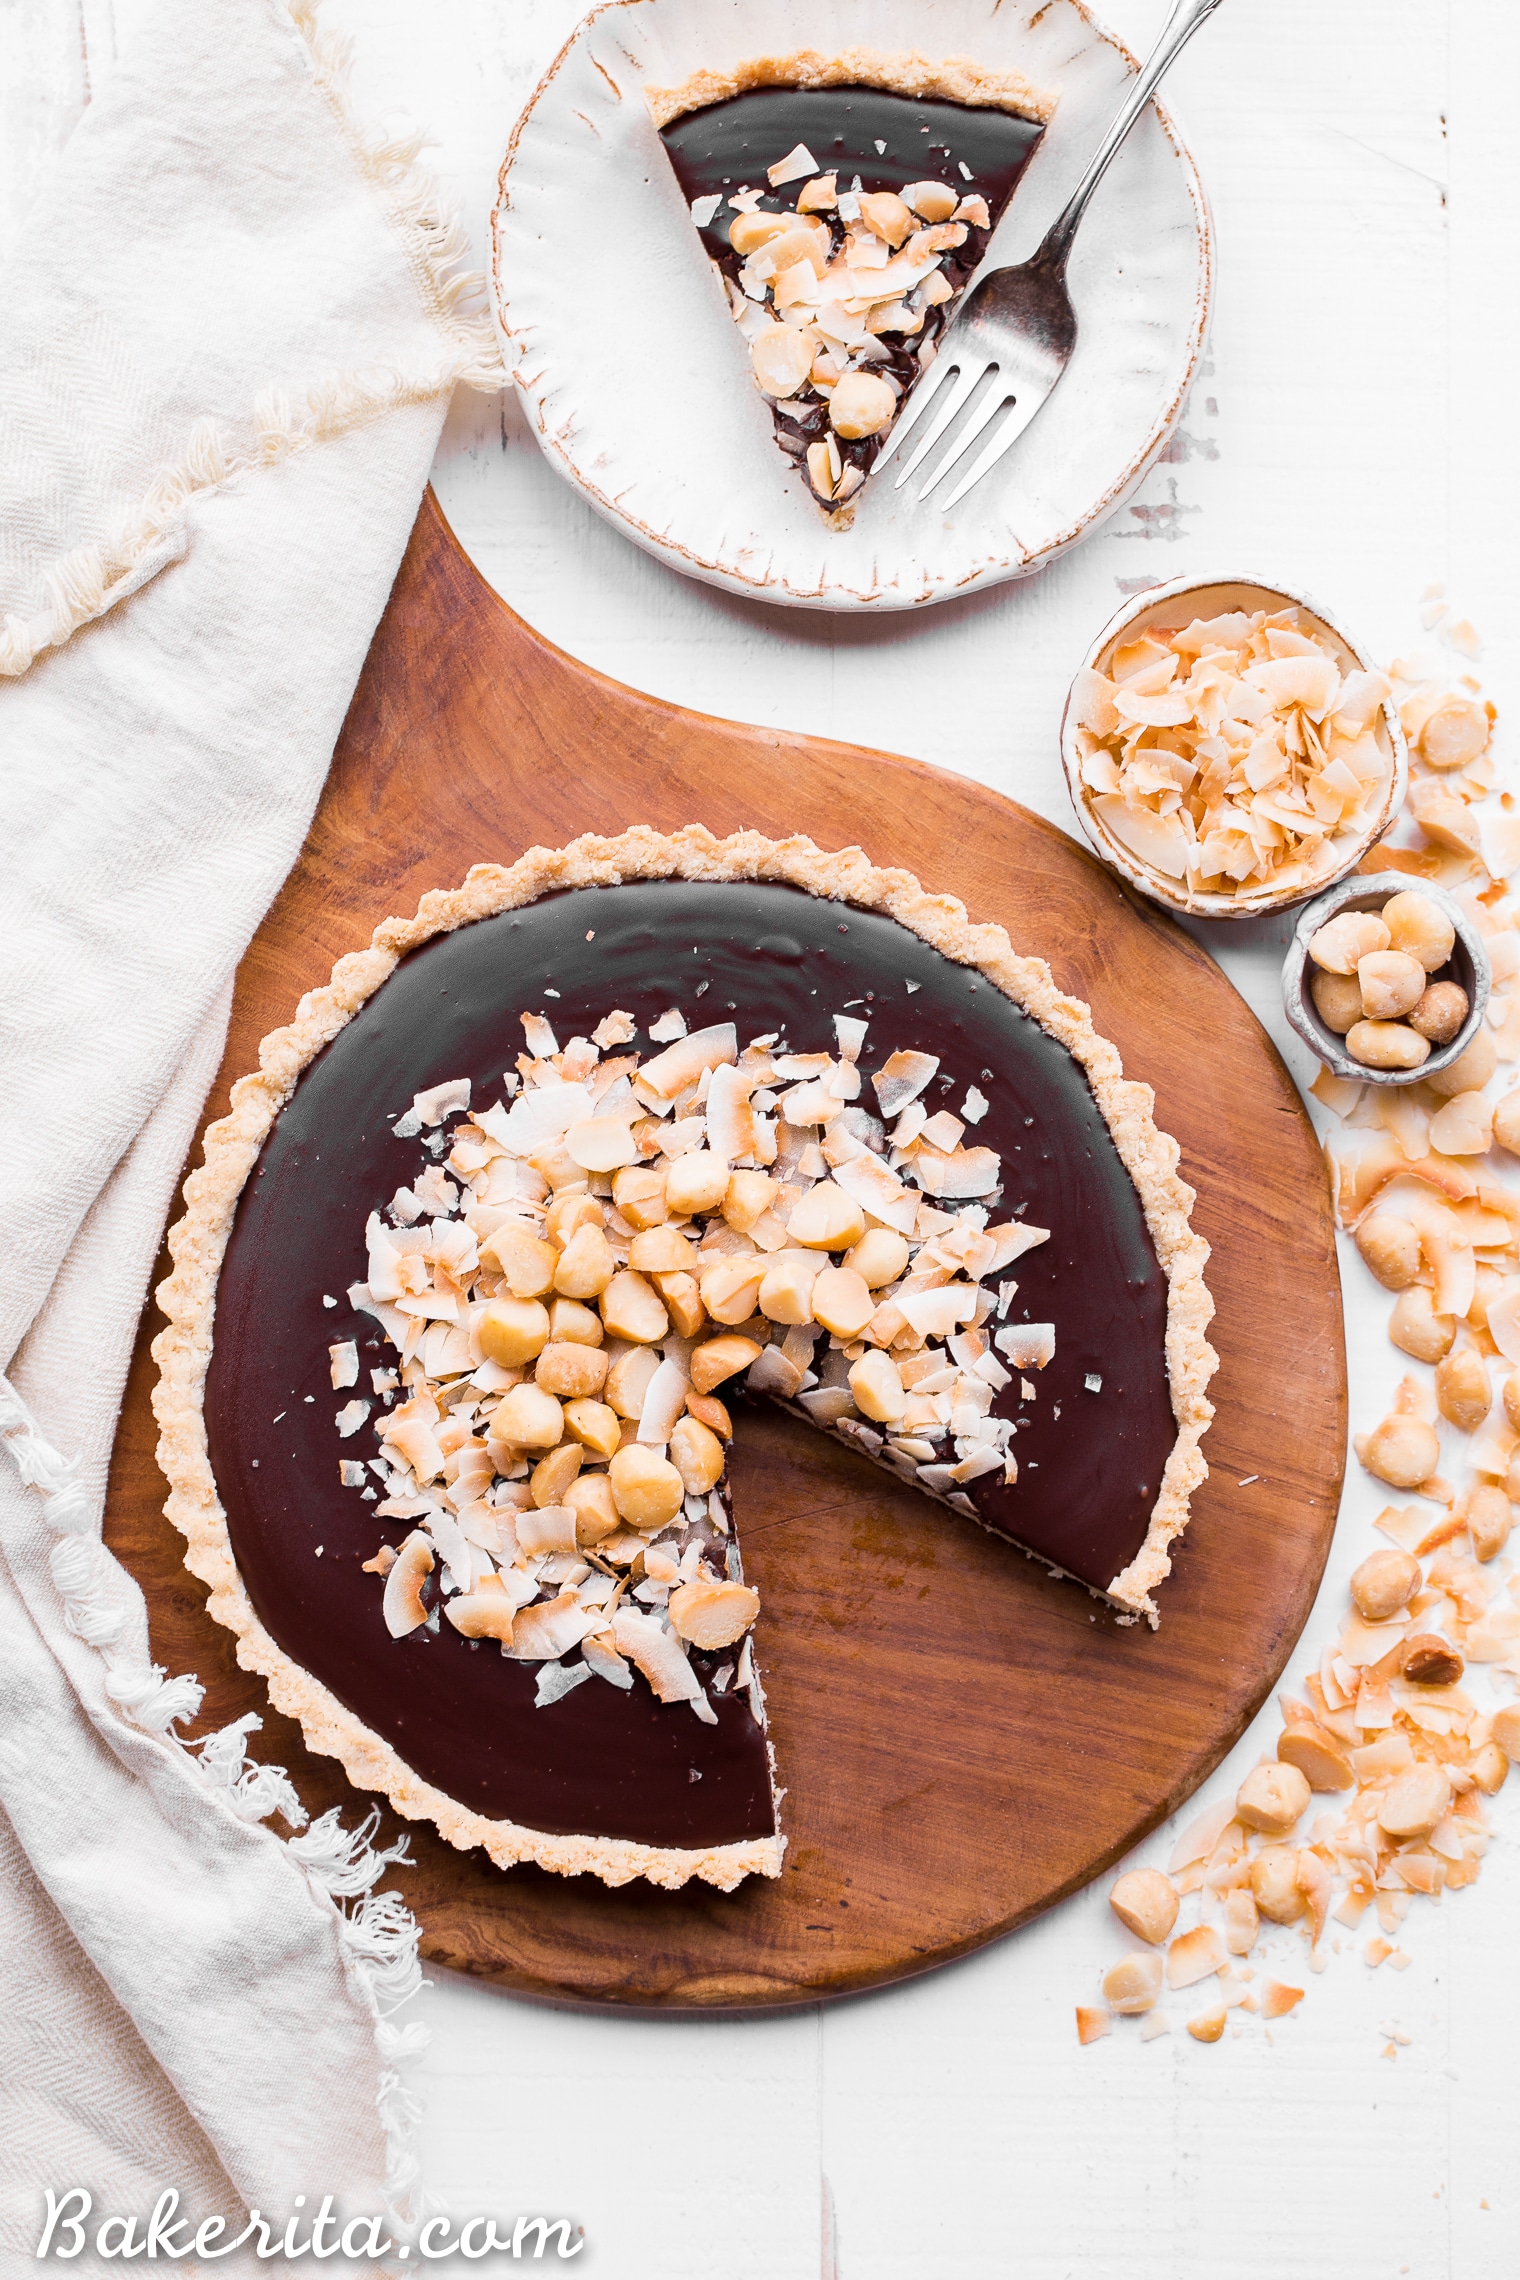 This Dark Chocolate, Coconut & Macadamia Nut Tart is decadent, delicious and easy to make. It has a coconut crust that's filled with a luscious chocolate ganache and topped with toasted coconut and macadamia nuts. You'd never guess that this nutty tart is gluten-free, vegan, Paleo, and refined sugar-free!